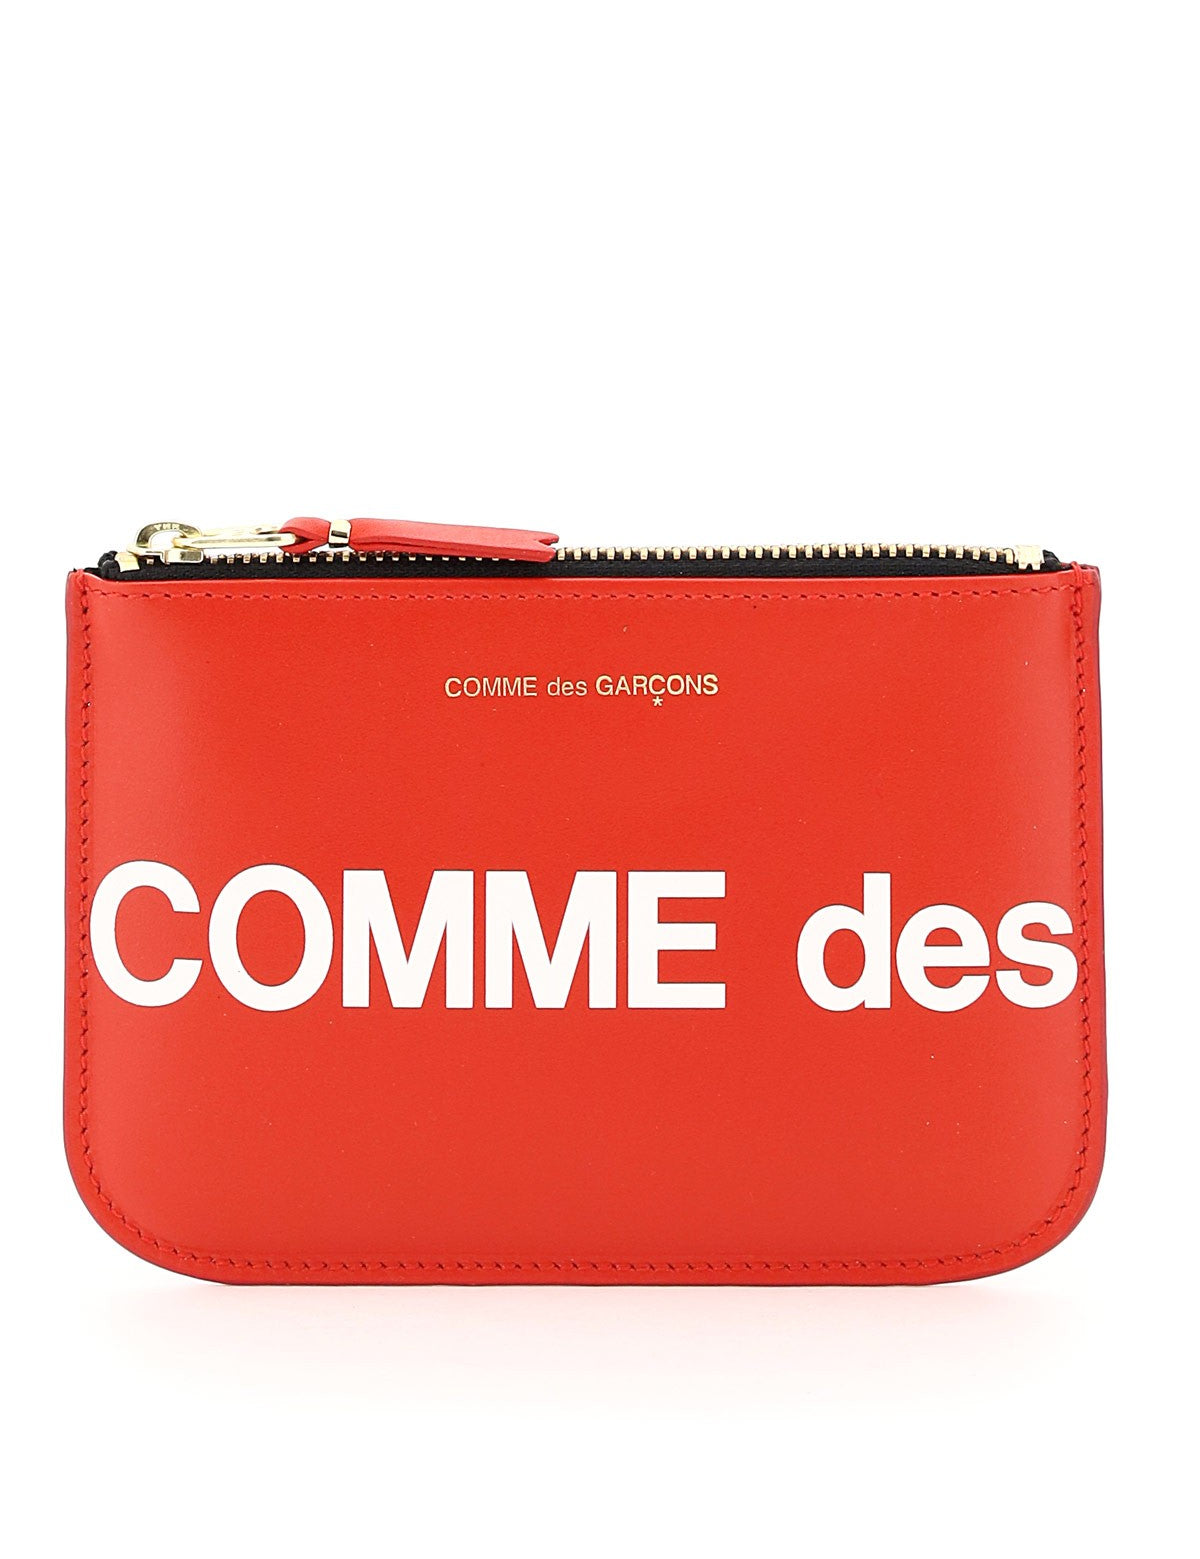 comme-des-garcons-wallet-pouch-with-huge-logo.jpg